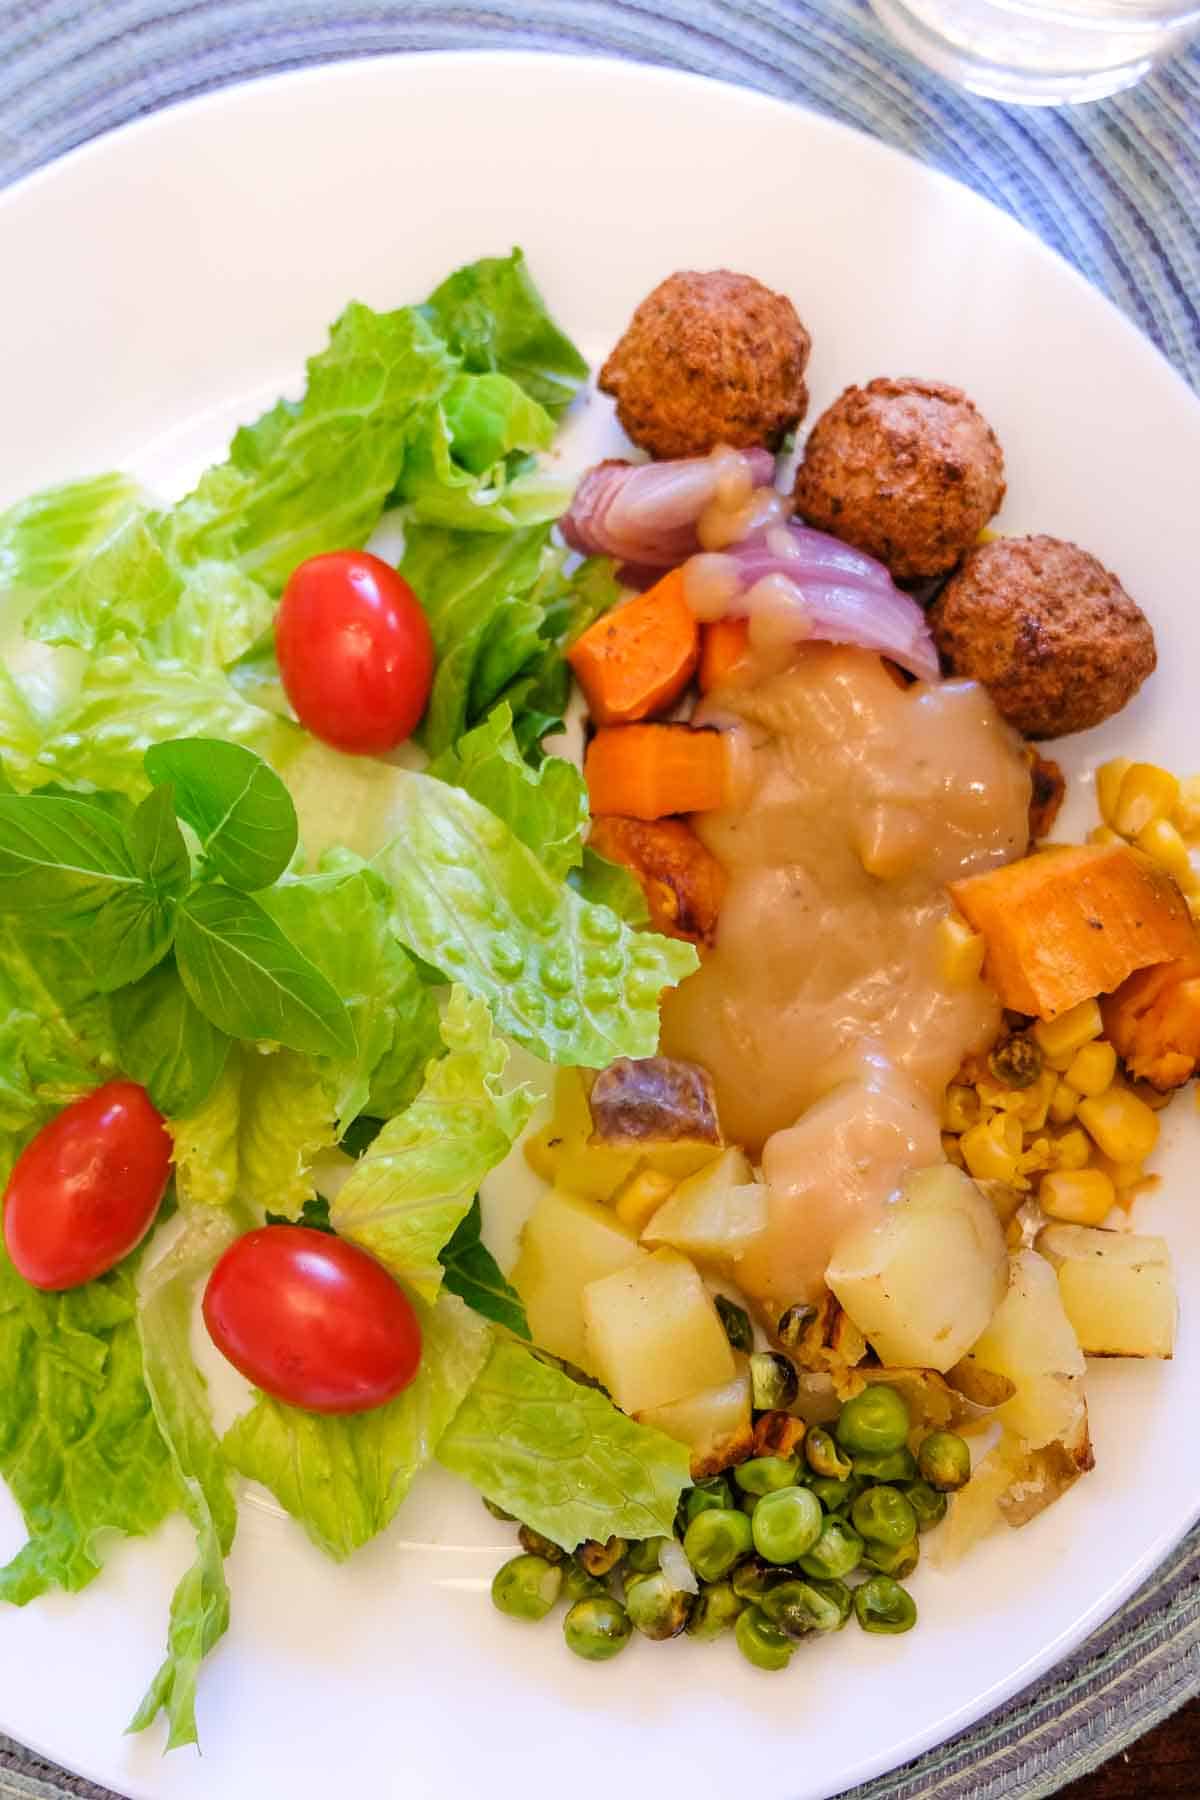 Vegan roasted vegetables and gravy on a plate with salad.